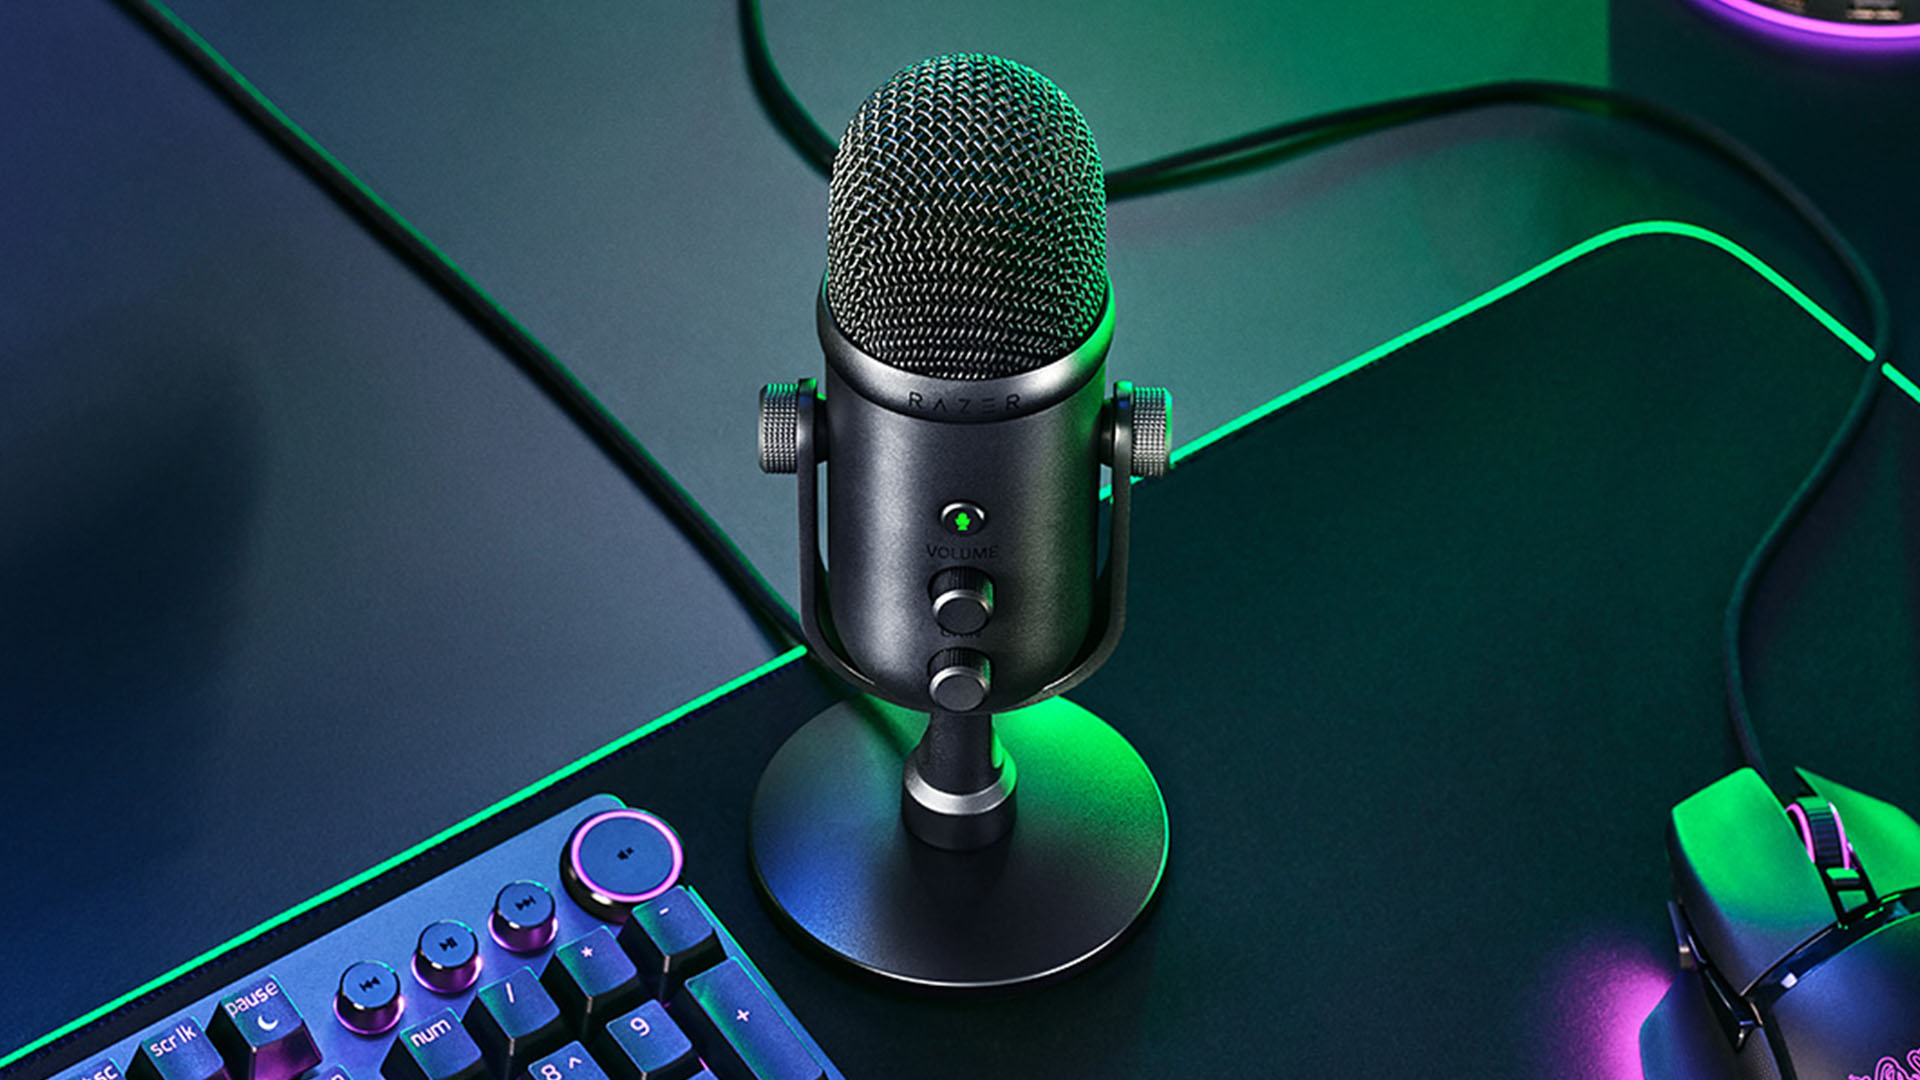 Razer Seiren V2 X USB Condenser Microphone for Streaming and PC Gaming